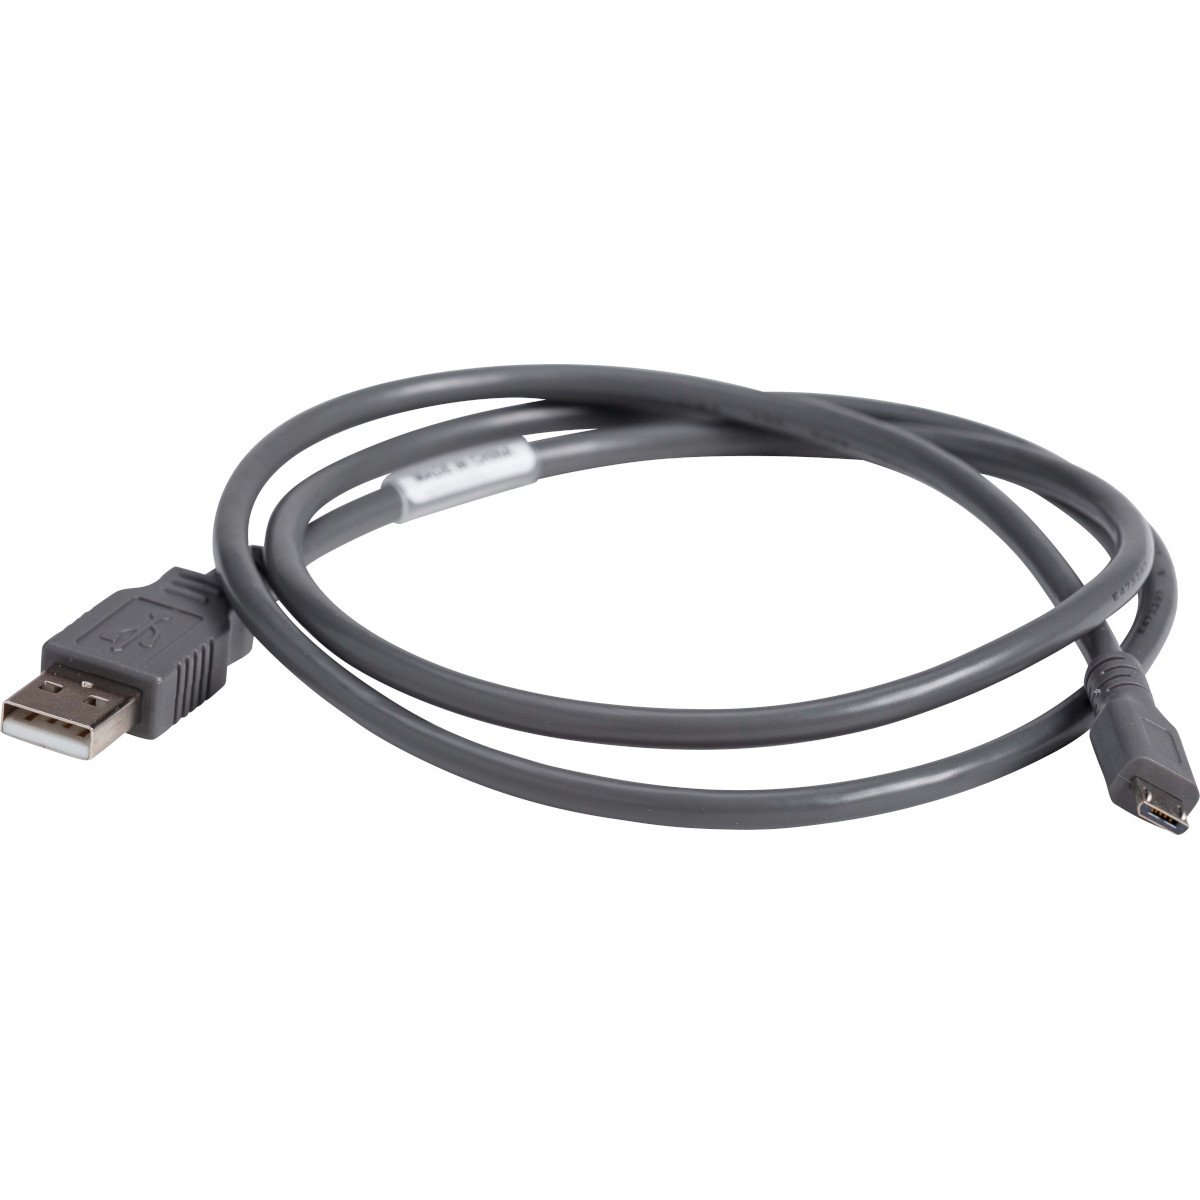 USB to Micro USB 3' Cable for Code